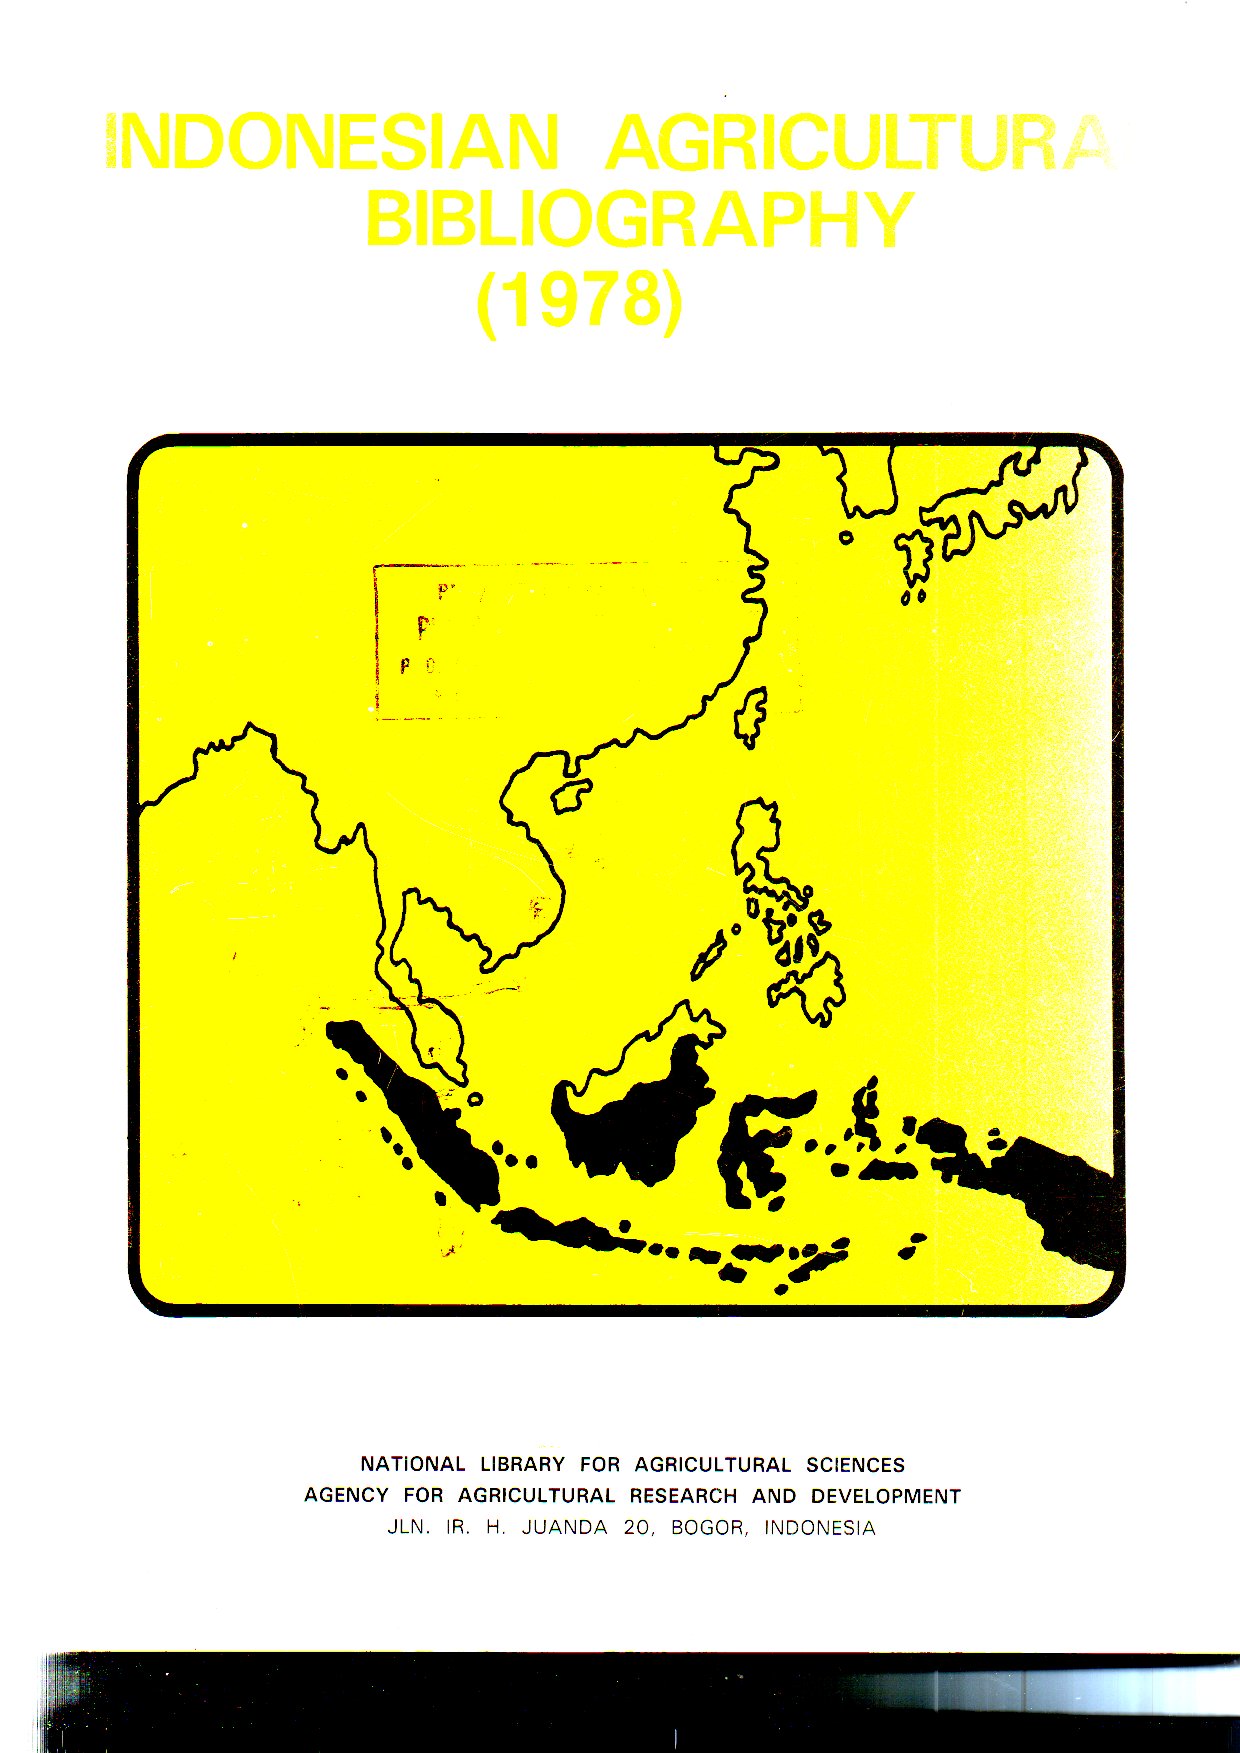 INDONESIAN AGRICULTURAL BIBLIOGRAGHY 1978